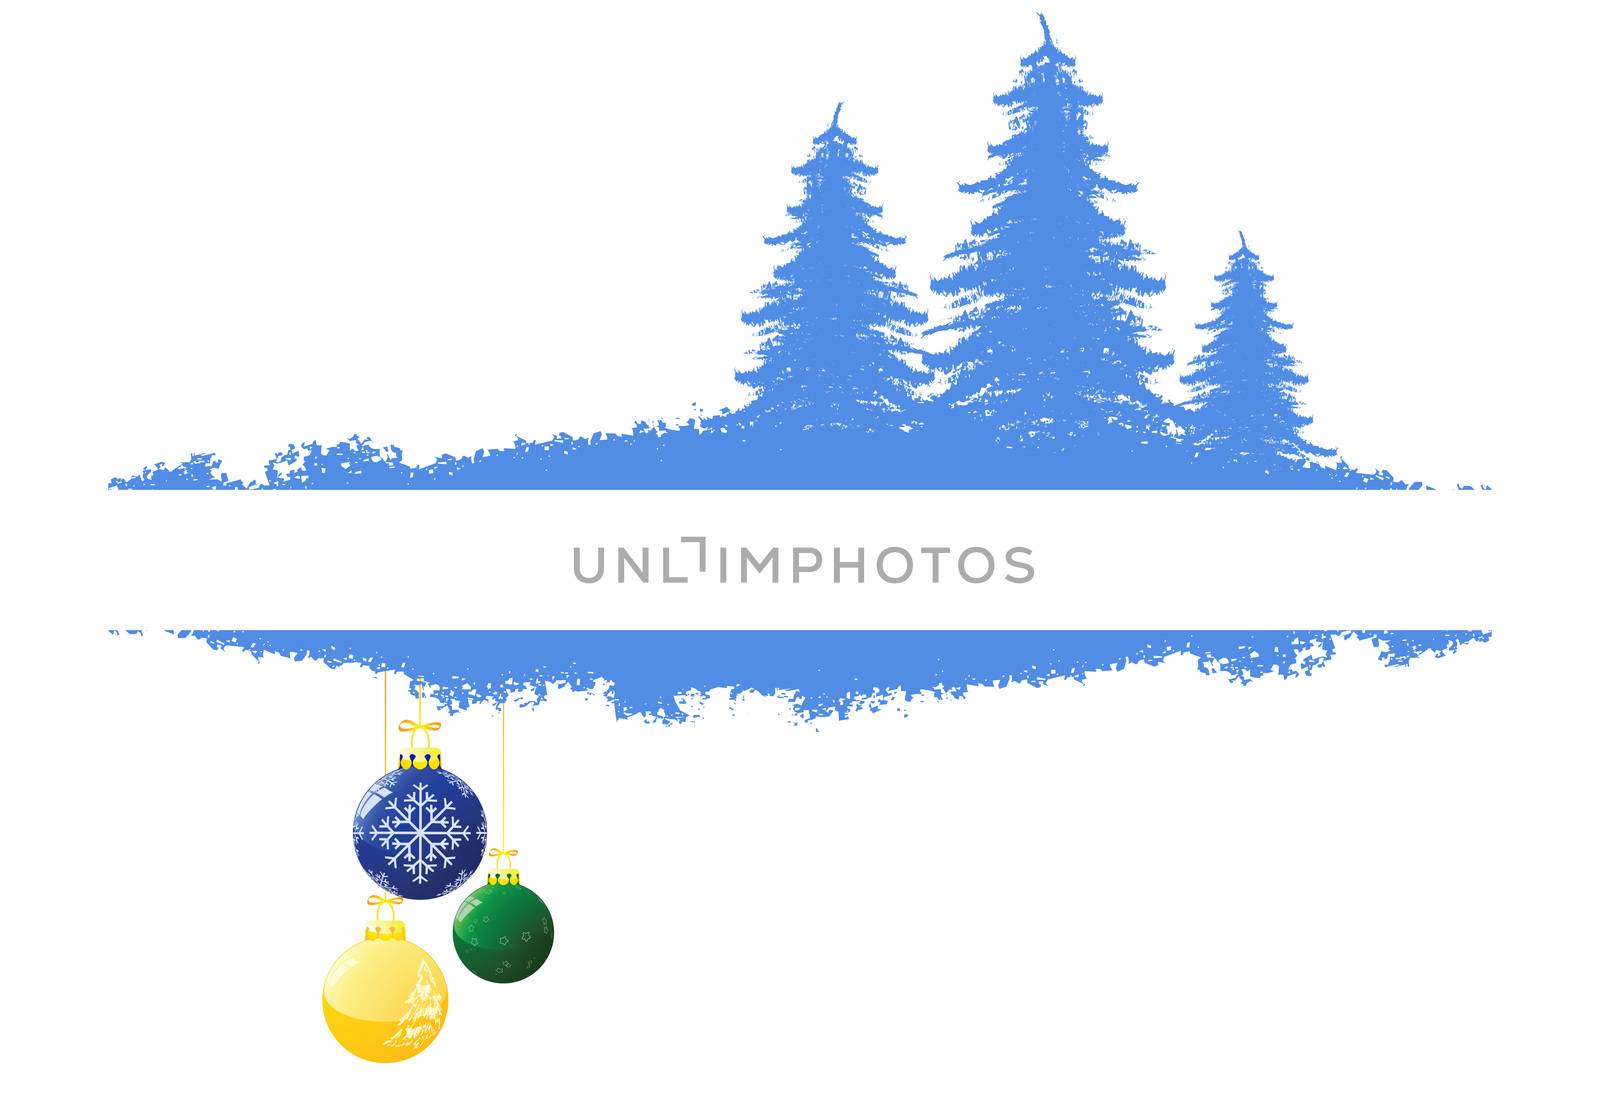 Grunge background with Christmas tree and toys